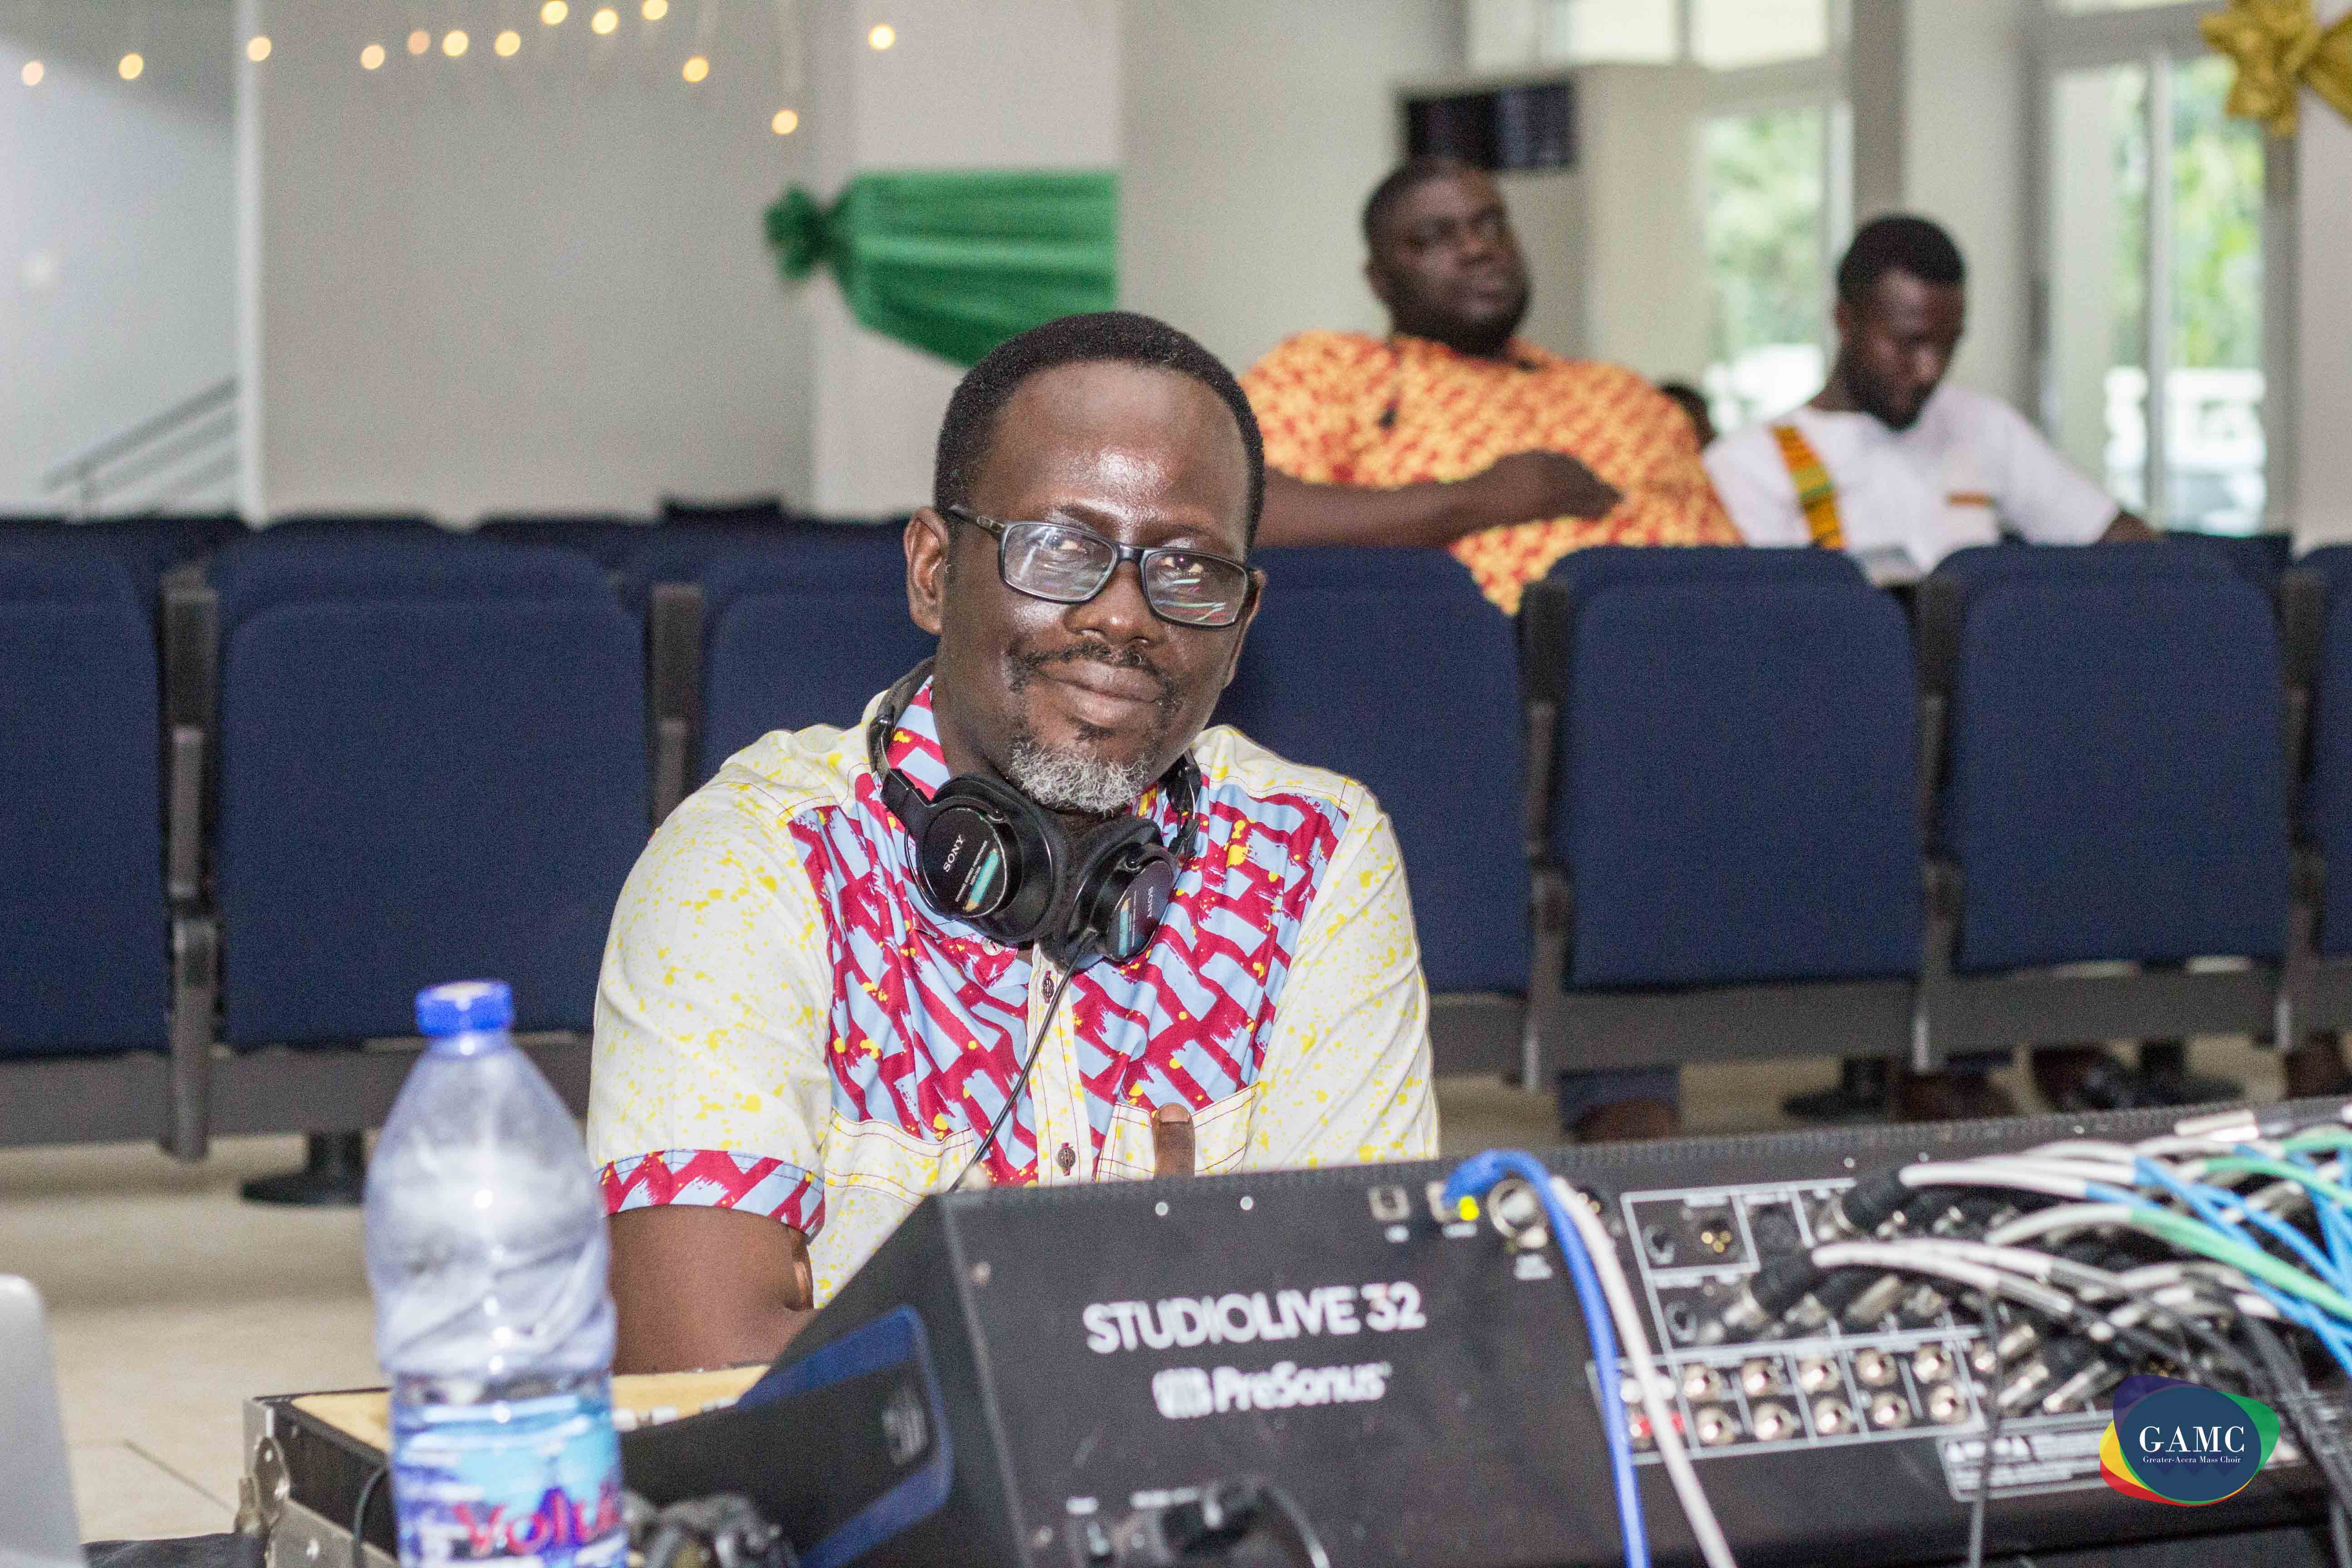 In Conversation with Dominic Ansah-Asare: Part 2 Kwaku Boakye-Frempong spoke with the founder and CEO of MIDO Productions, Dominic Ansah-Asare, about his journey and rise to dominance in sound engineering in Ghana.